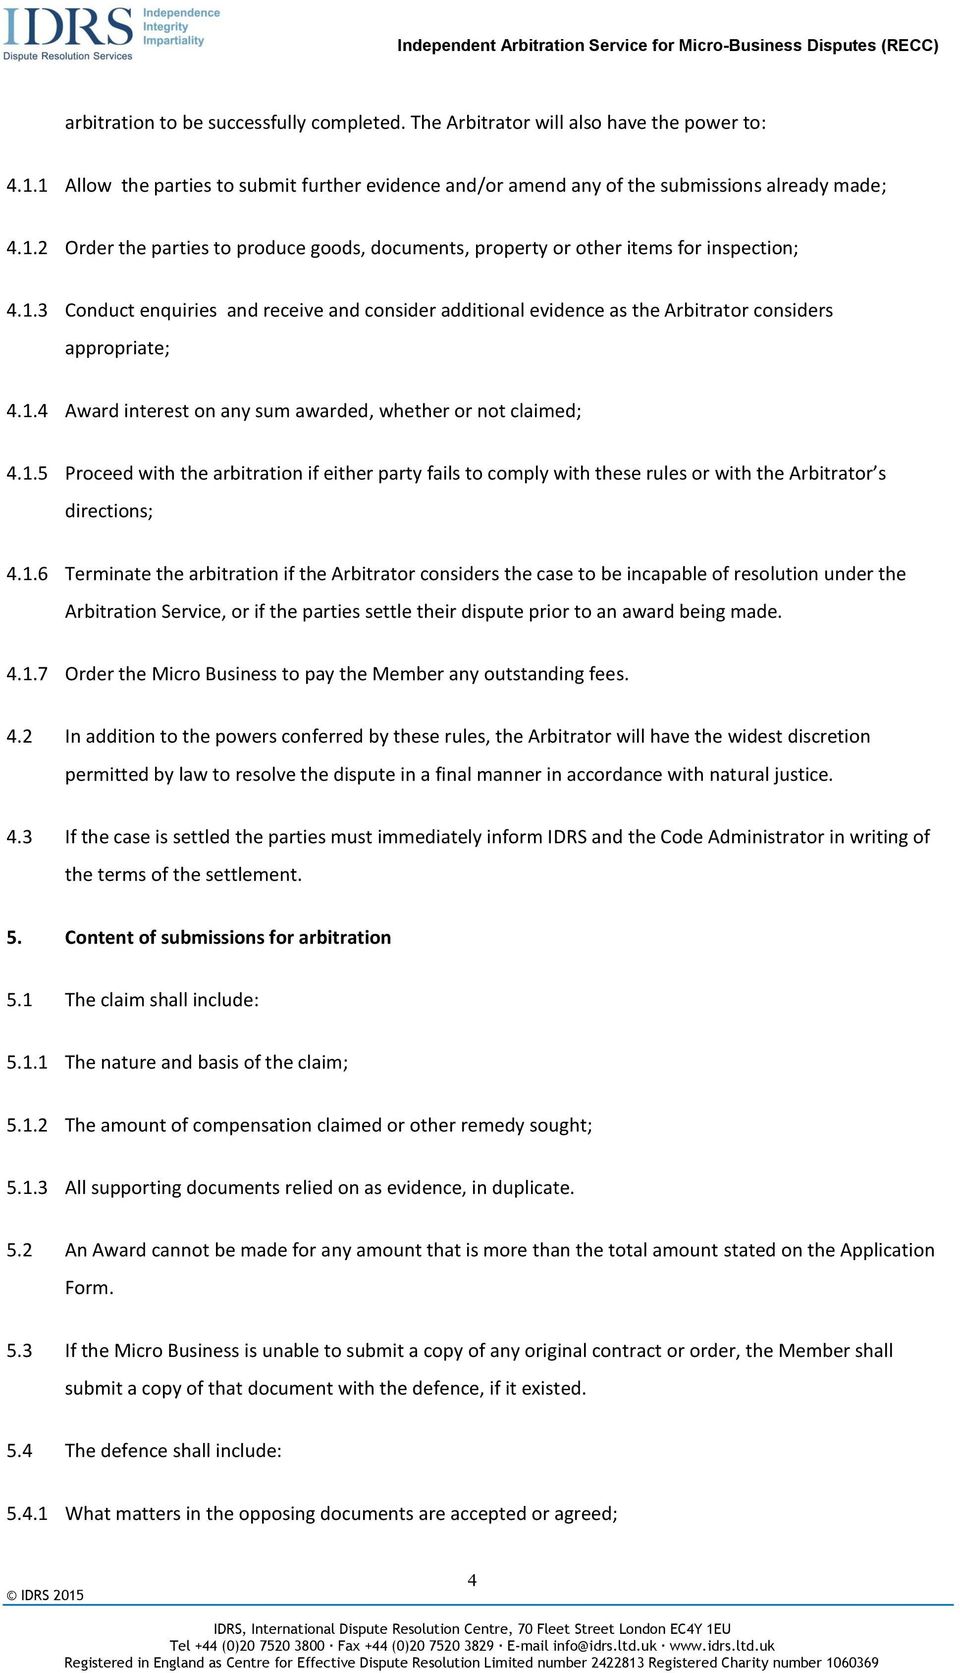 1.6 Terminate the arbitration if the Arbitrator considers the case to be incapable of resolution under the Arbitration Service, or if the parties settle their dispute prior to an award being made. 4.